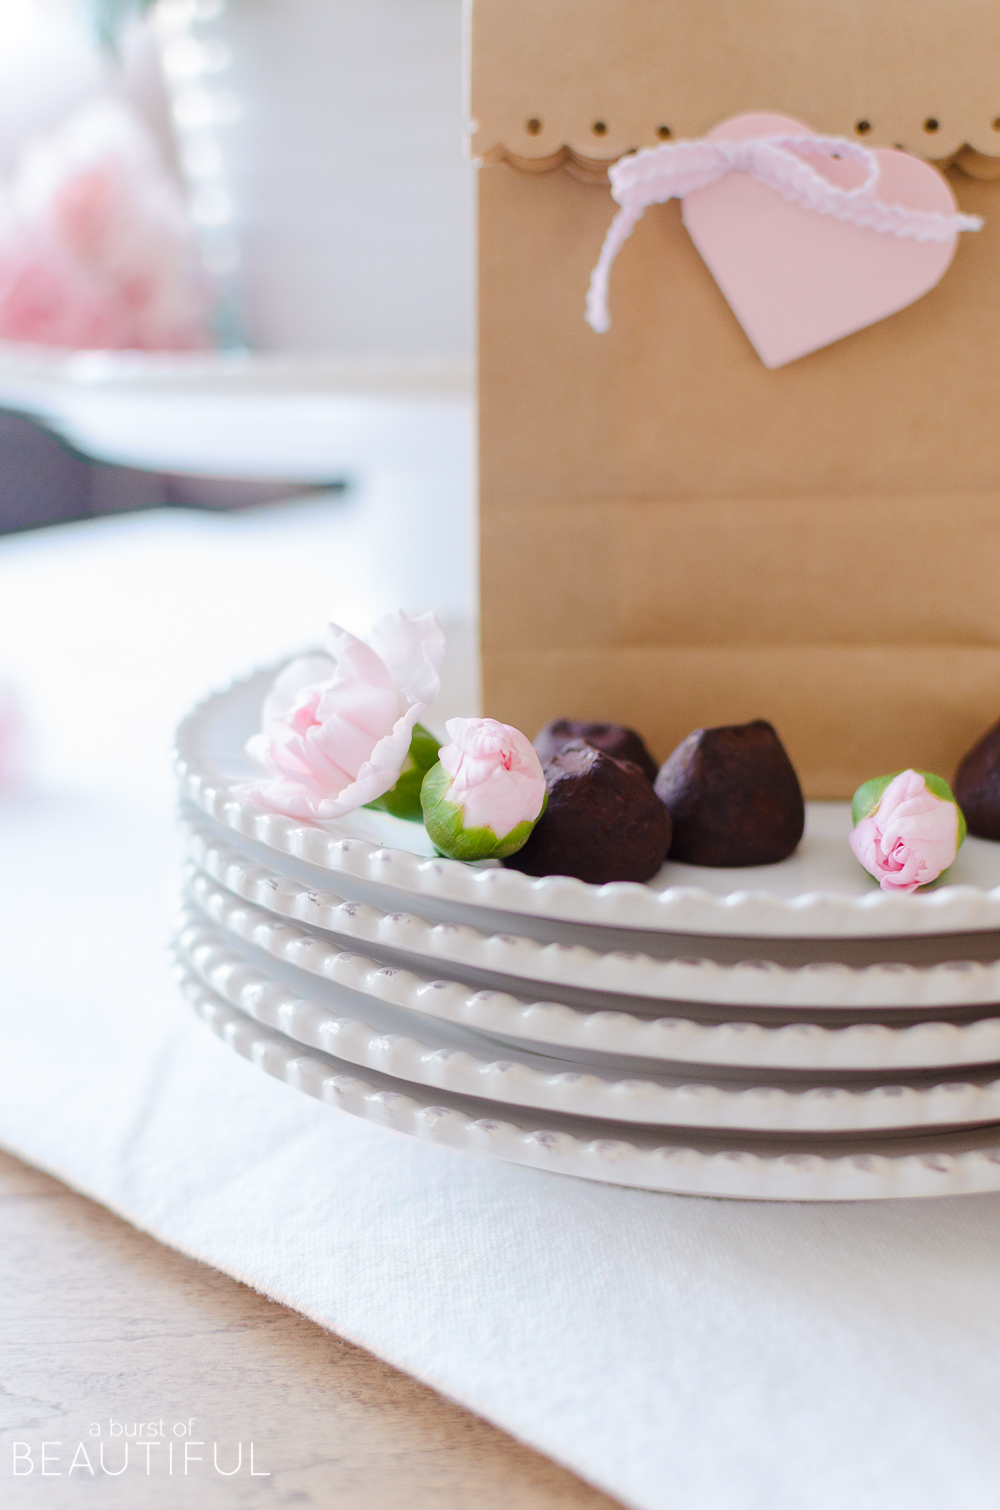 These homemade Valentine's Day Party Favors are easy to make and will brighten anyone's day!